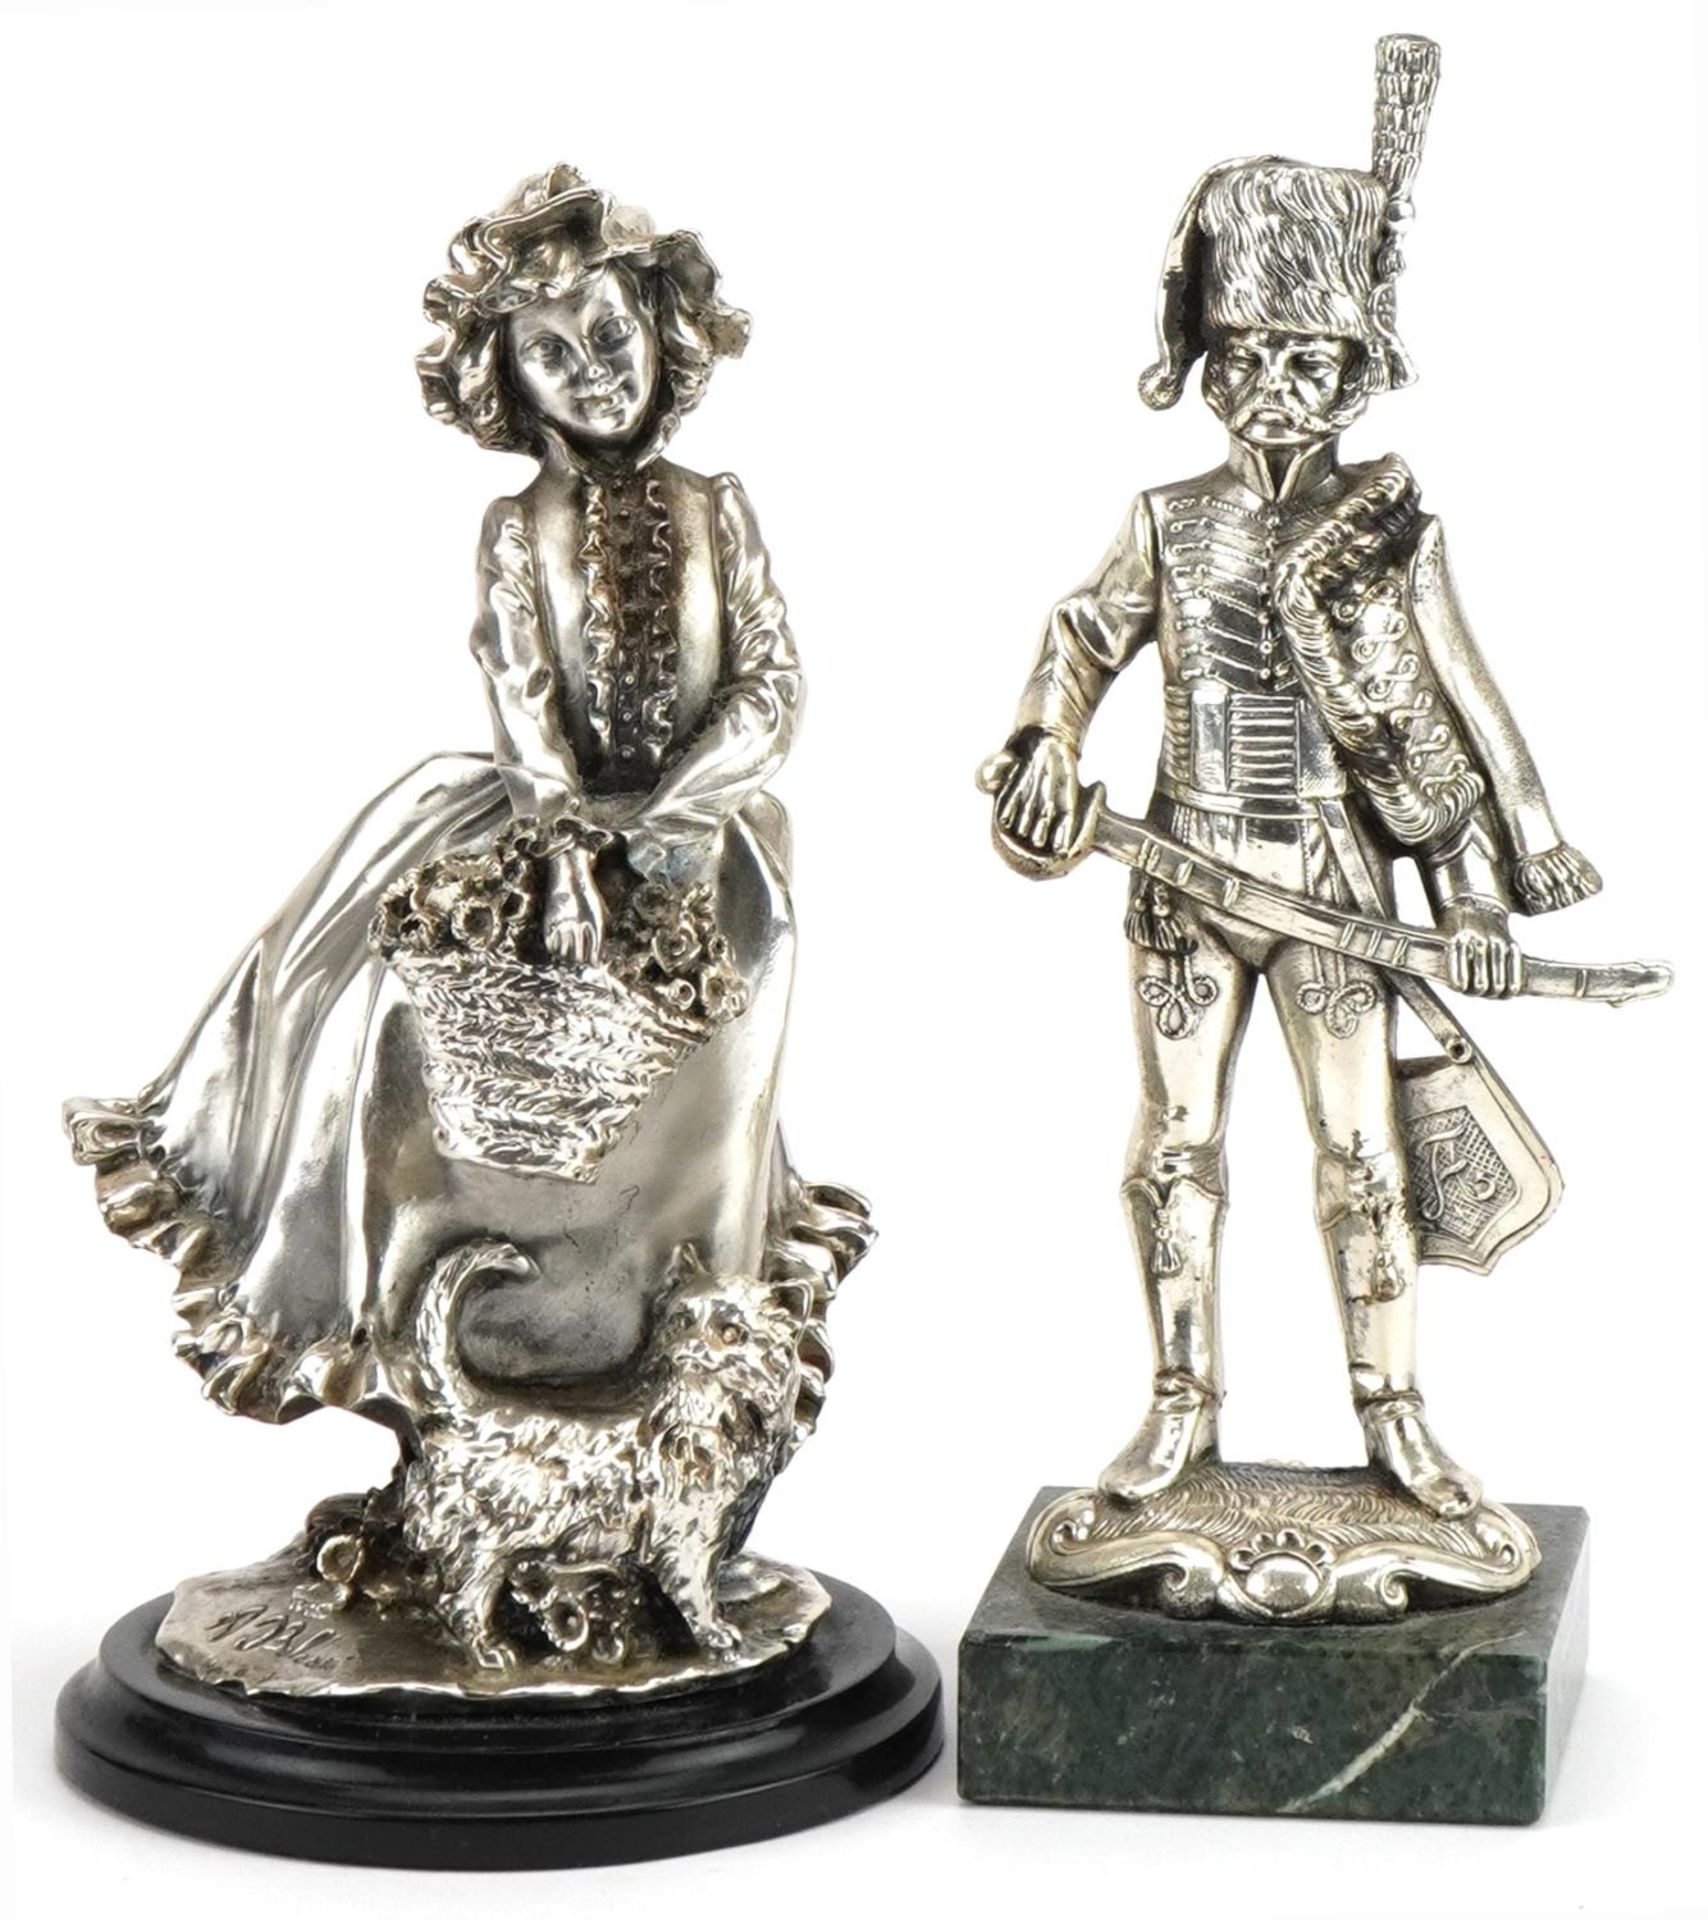 Brunel, Italian silver filled figure of a Dutch girl with kitten and a similar example of a